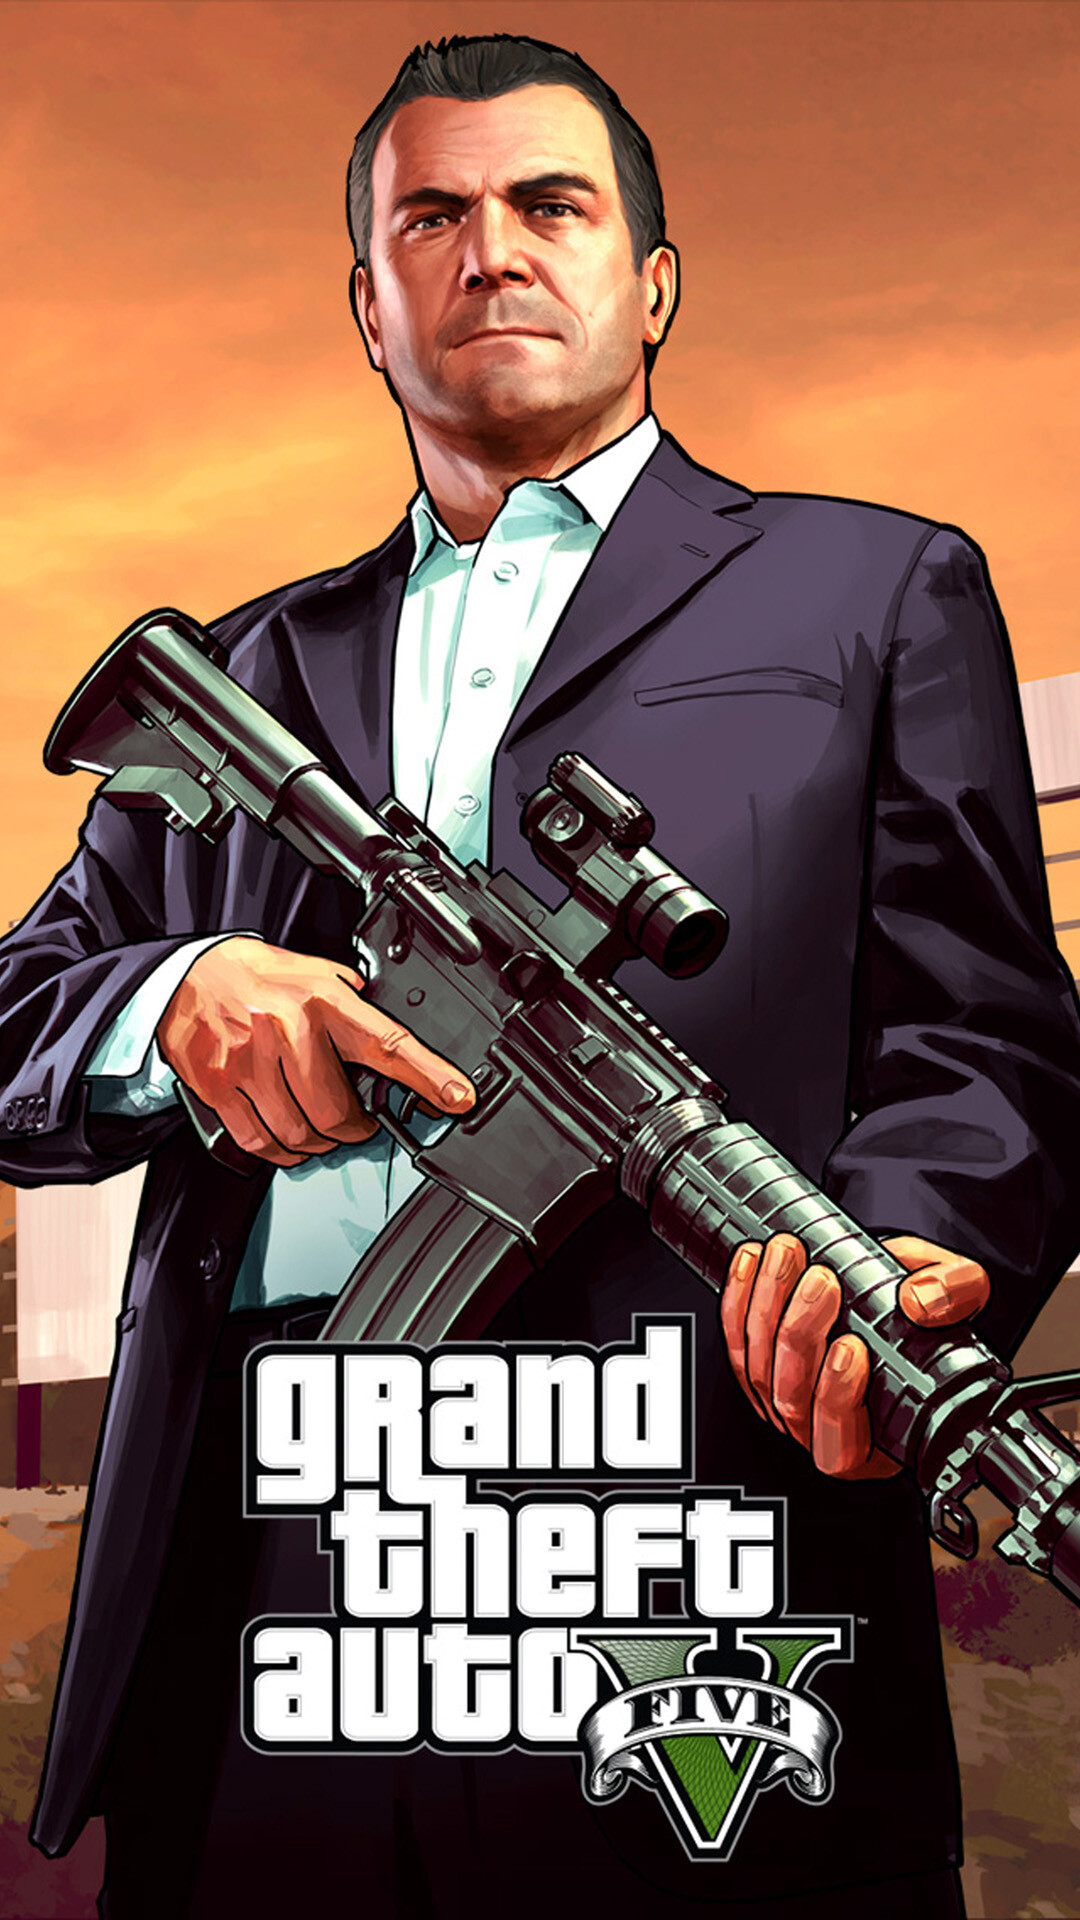 Grand Theft Auto 5: Michael De Santa, Faked his death to retire and live a peaceful life with his family in Los Santos. 1080x1920 Full HD Wallpaper.